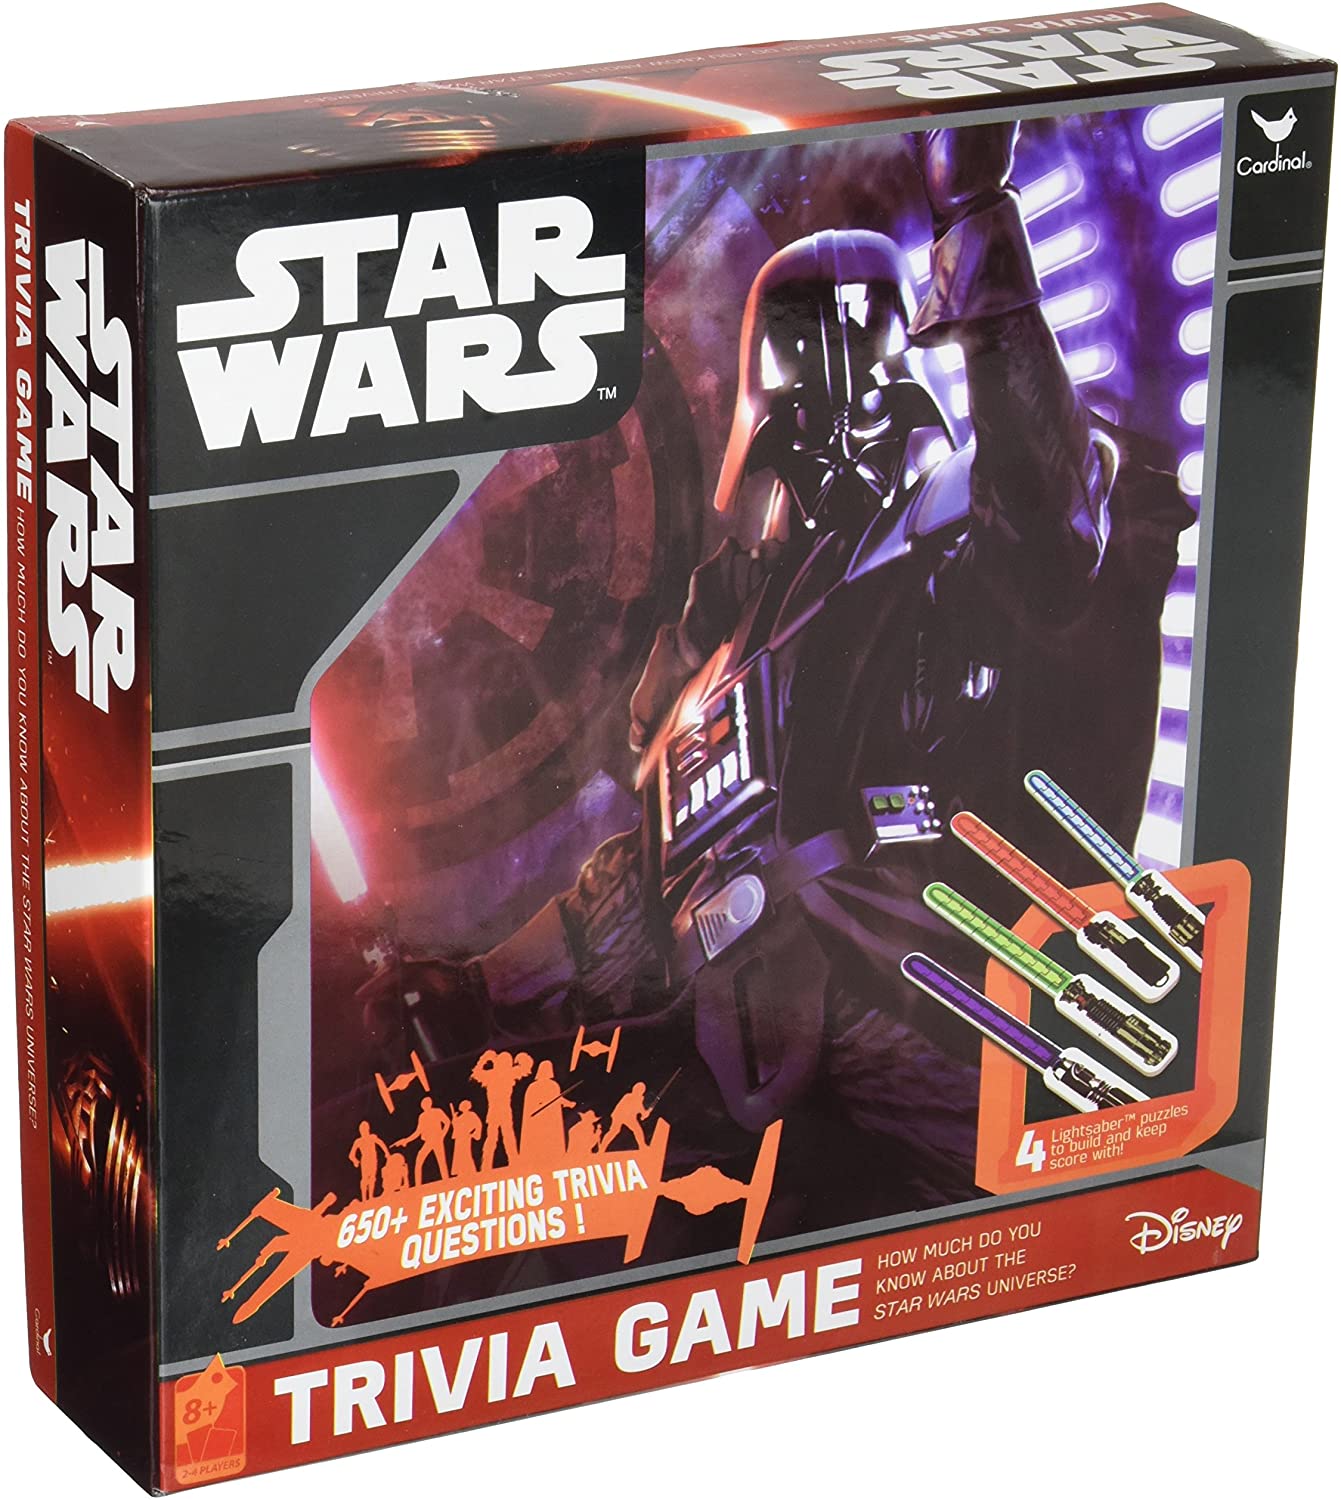 Star Wars Trivia Game - USED - By Seller No: 7425 Eric Bettinger